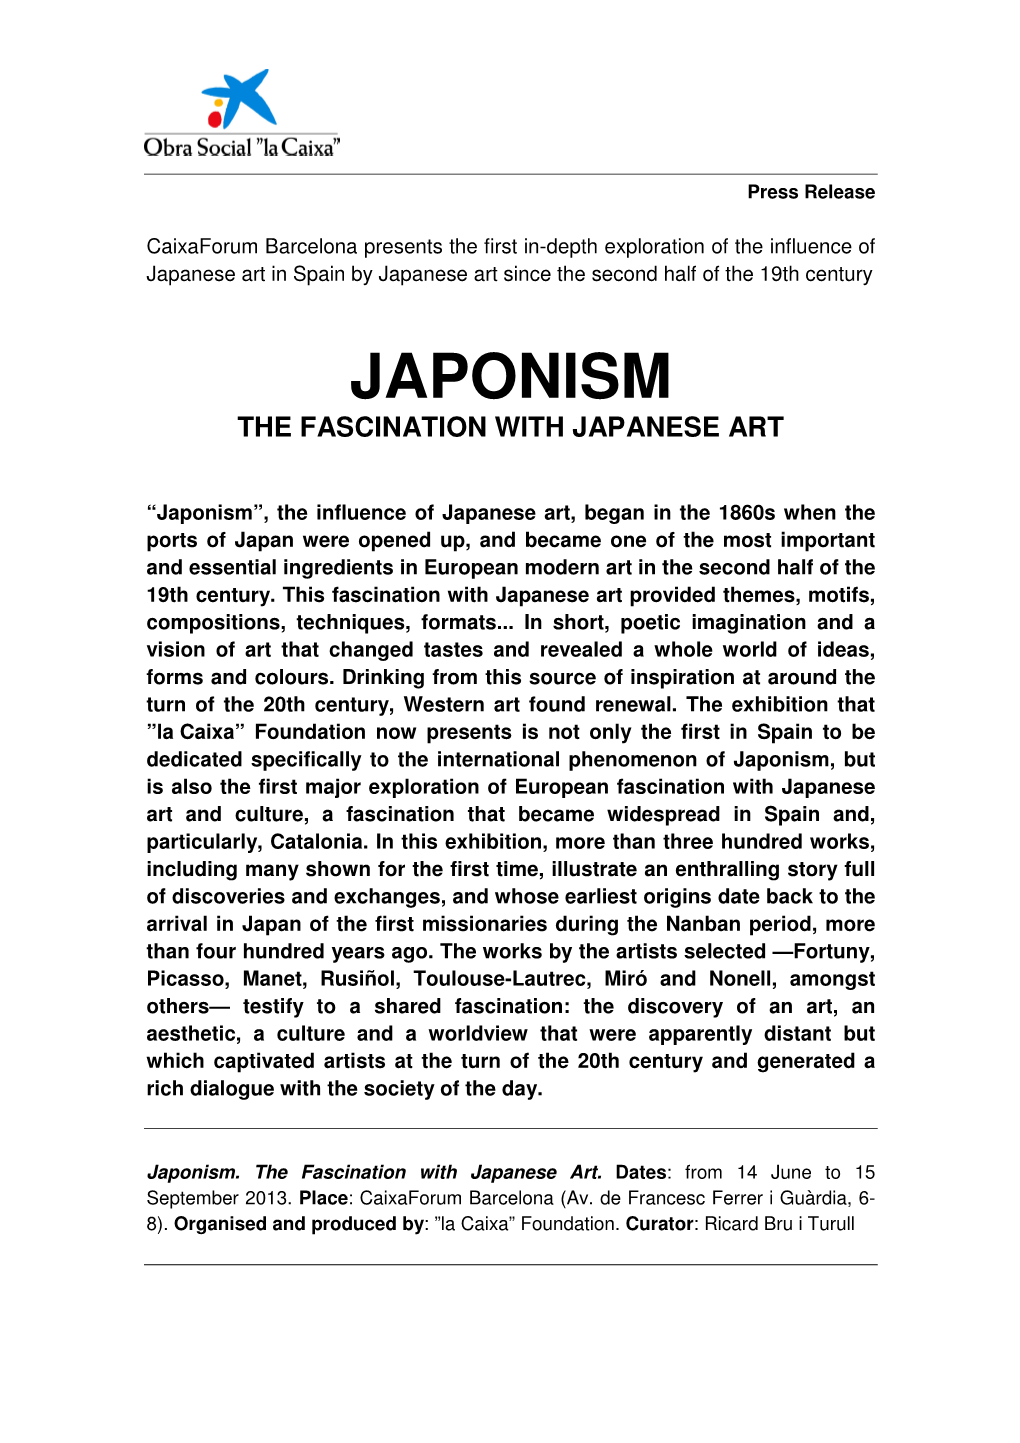 Japonism the Fascination with Japanese Art